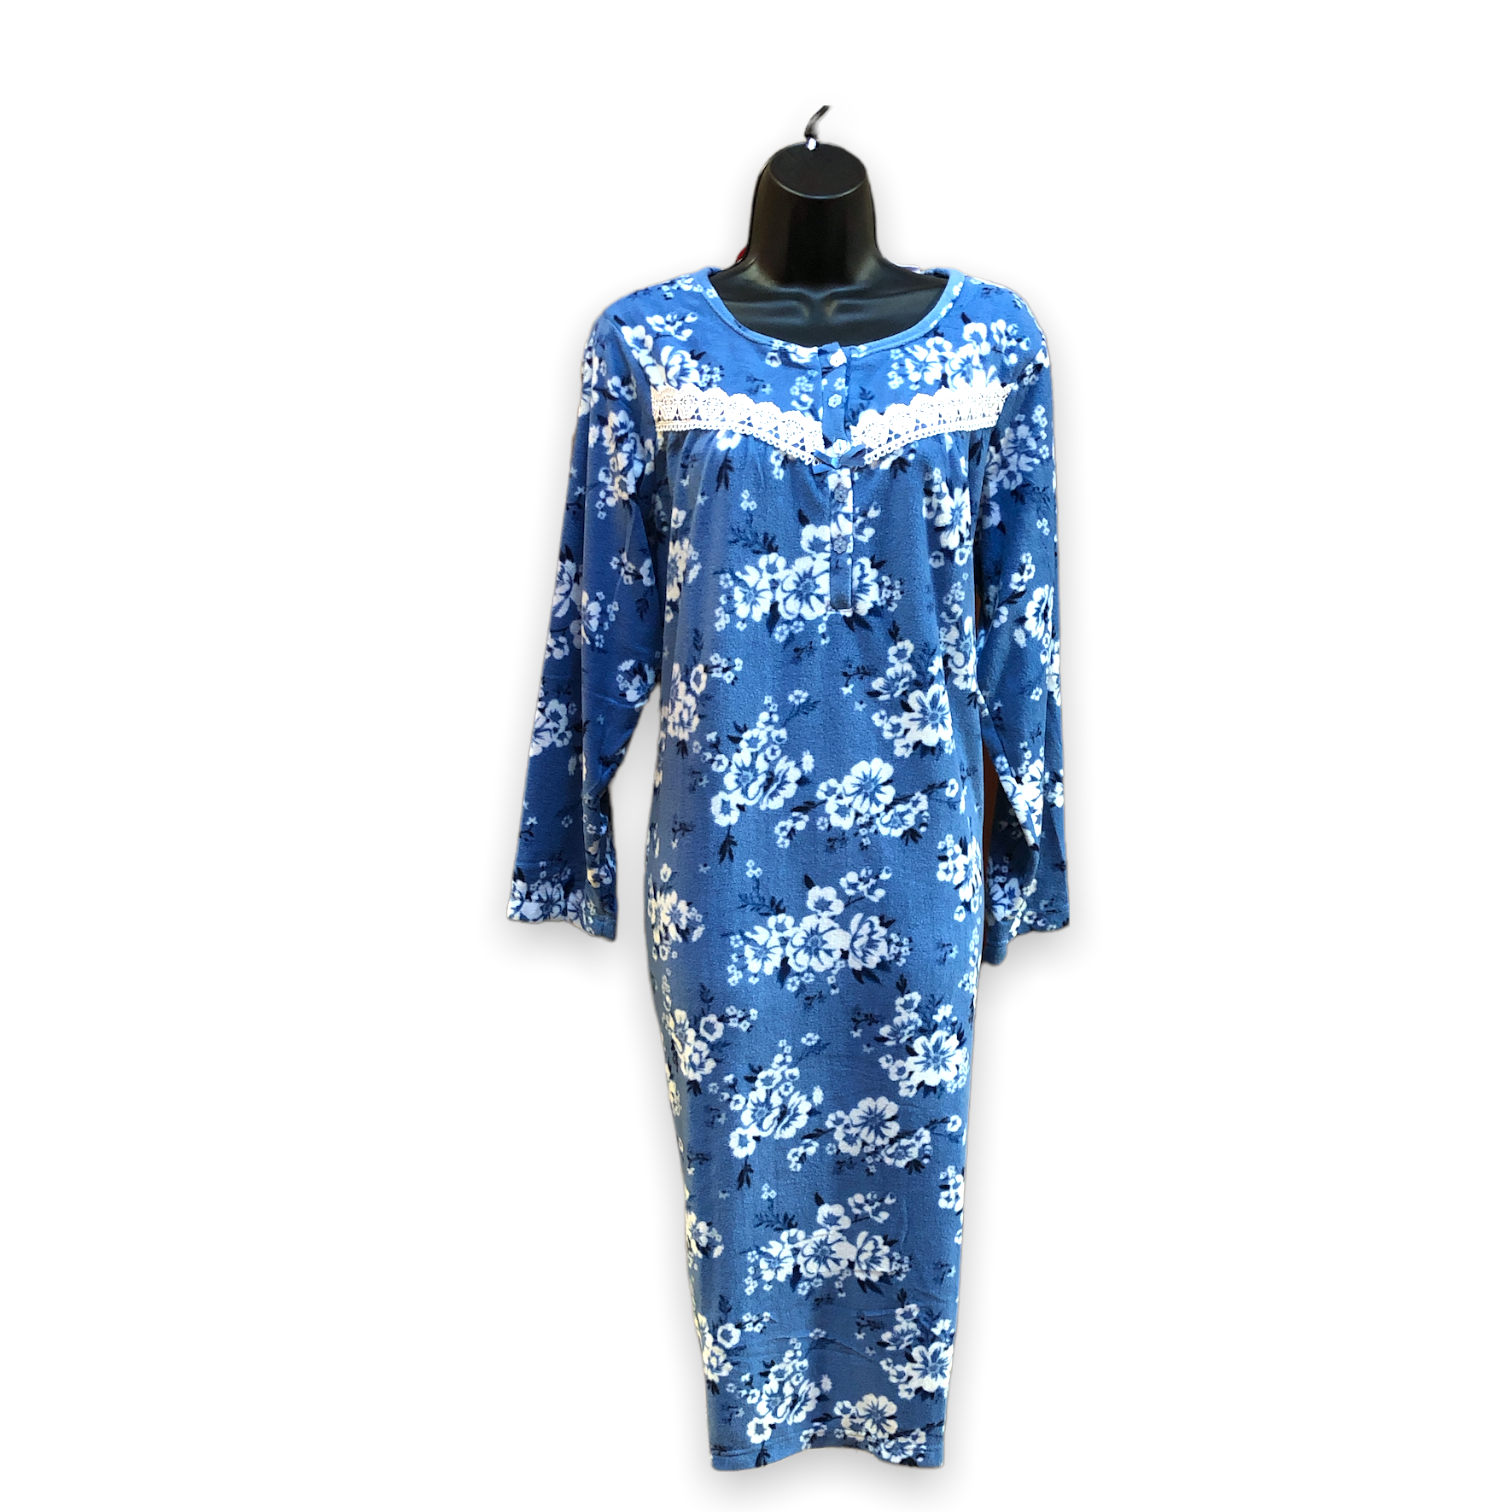 BULK BUY - Women's Micropolar Printed Long Sleeve Gown with Lace Trim (6-Pack or 3-Pack)